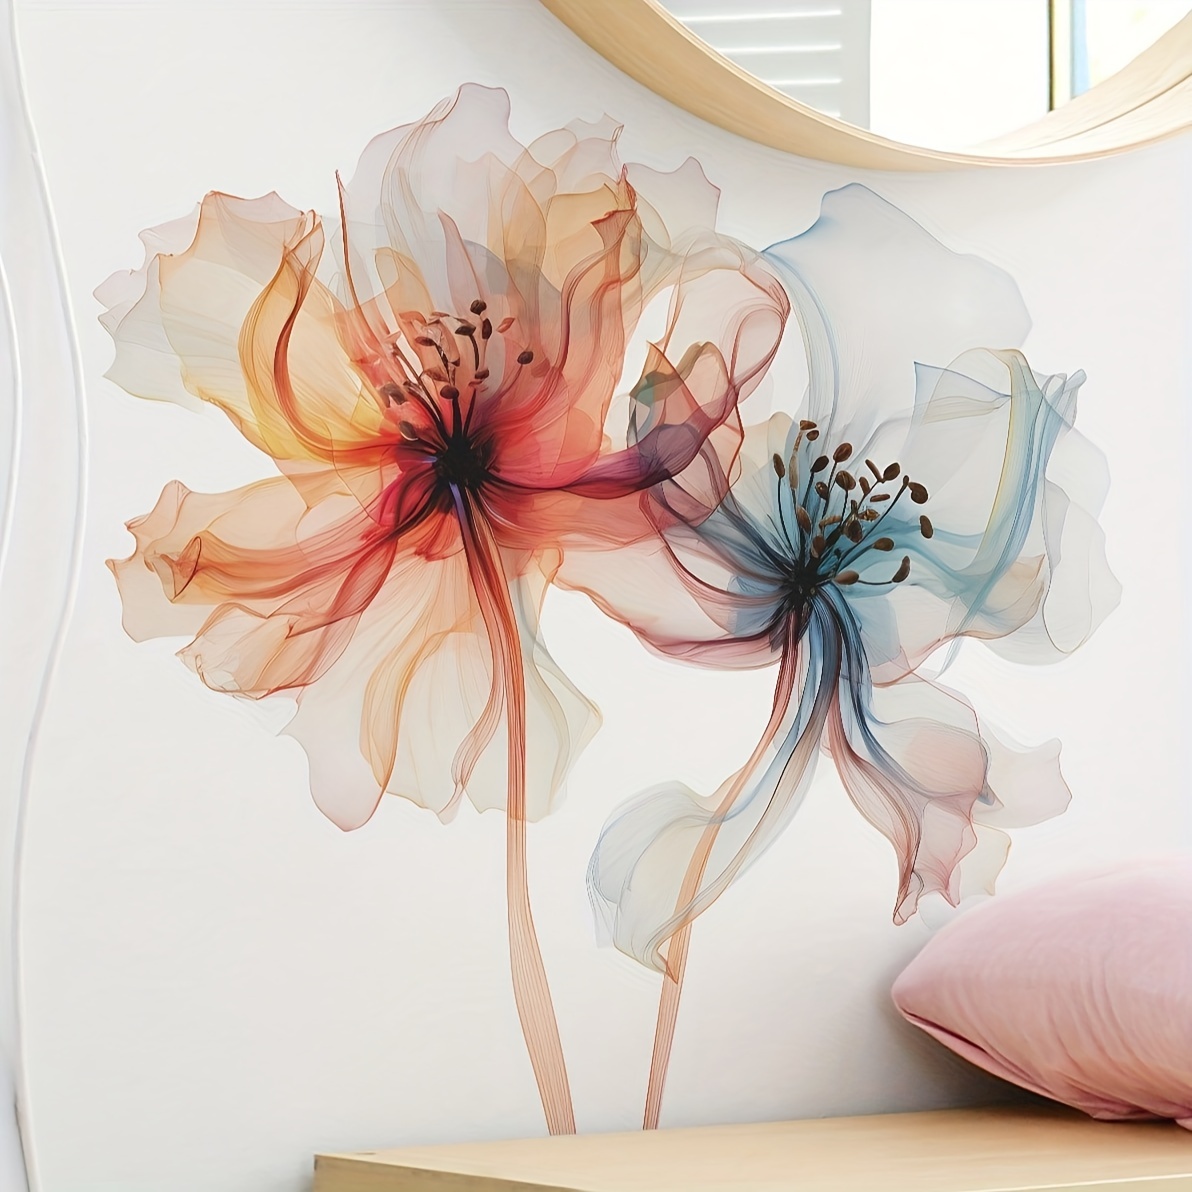 

2pcs Creative Watercolor Wall Stickers, Flowers, Removable Waterproof Vinyl Stickers, Stickers For Office School Classroom Study Background Wall Decor, Home Decor, 9.8*23.6in*2pcs